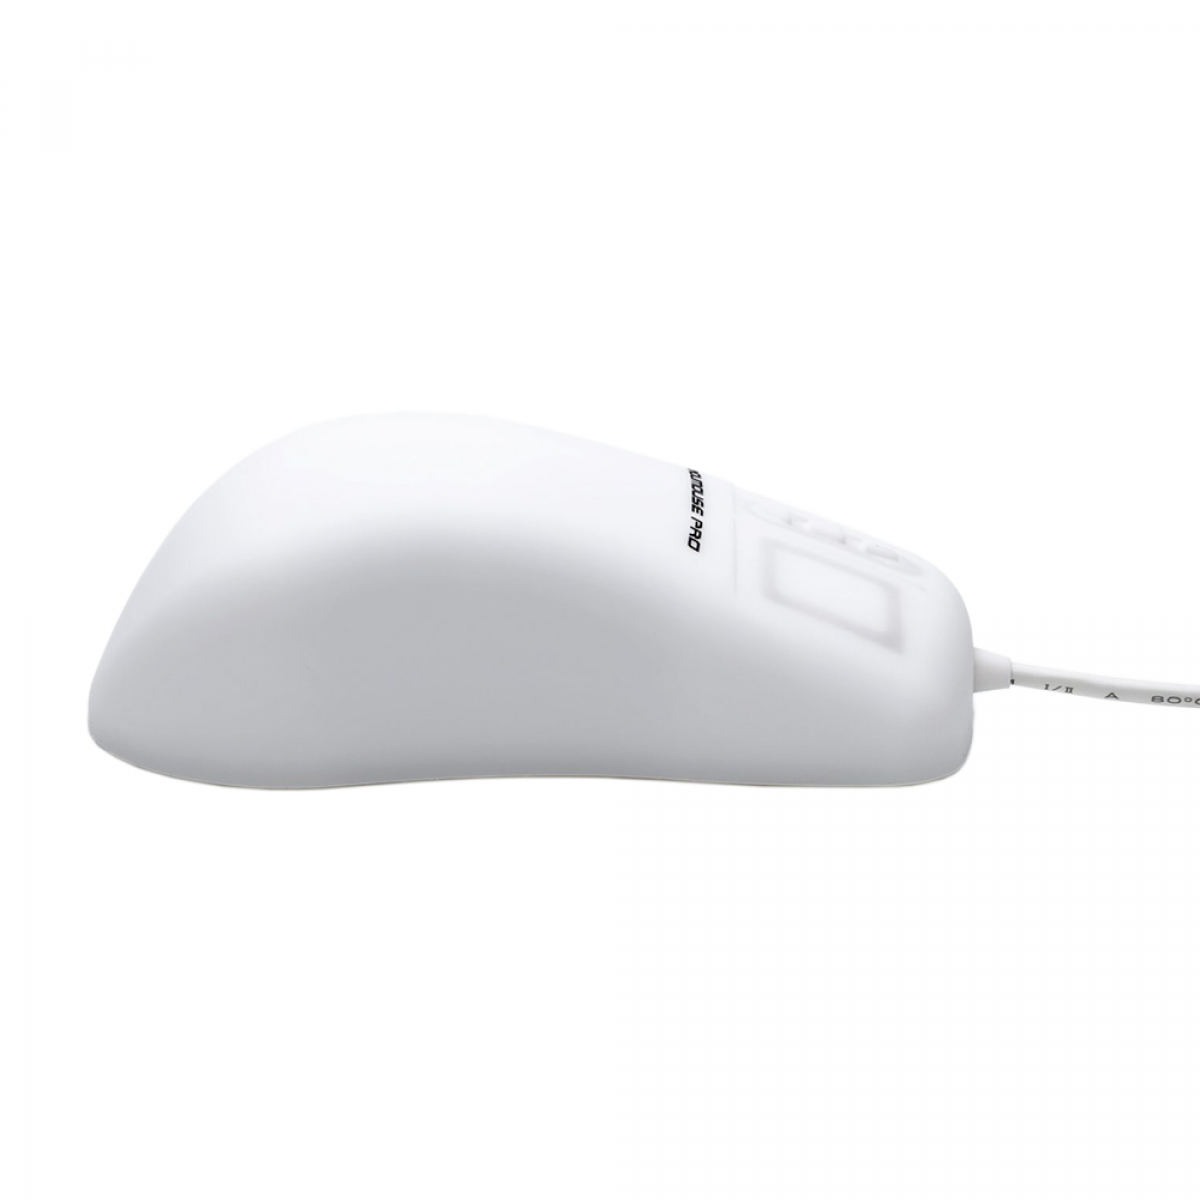 GETT Indumouse Pro disinfectable mouse